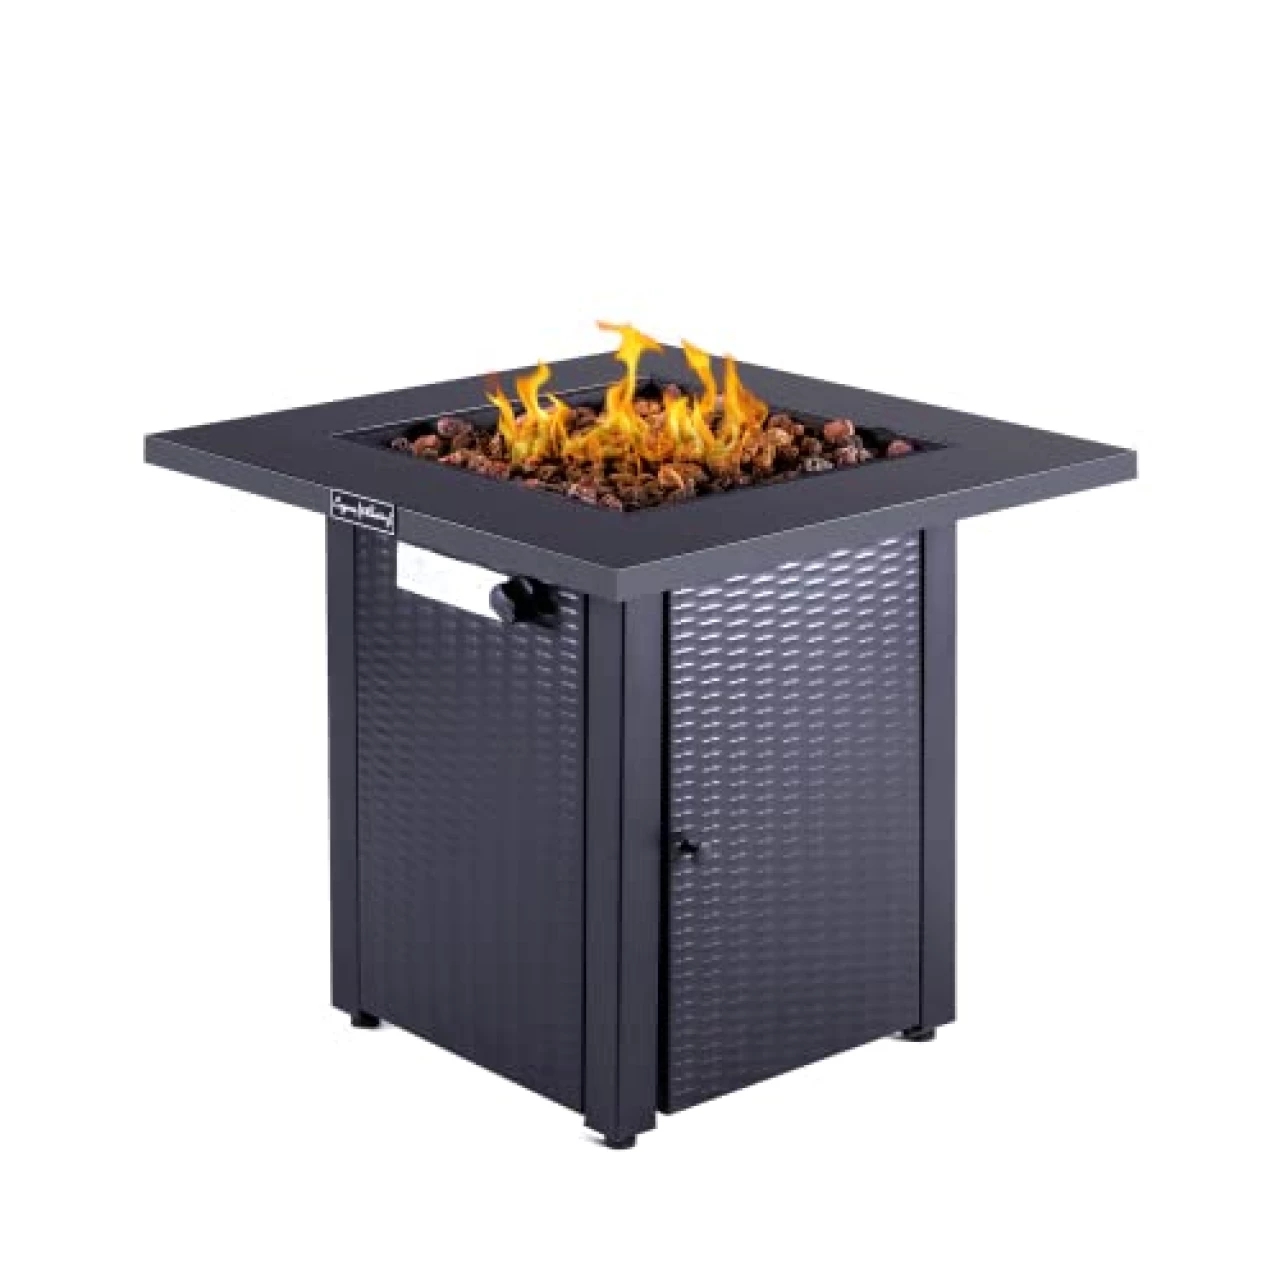 Legacy Heating 28inch Wicker &amp;Rattan Square Propane Fire Pit Table, Outdoor Dinning Gas Fire Table with Lid, 50,000BTU, Lava Stone, ETL Certification, for Outside Garden Backyard Deck Patio